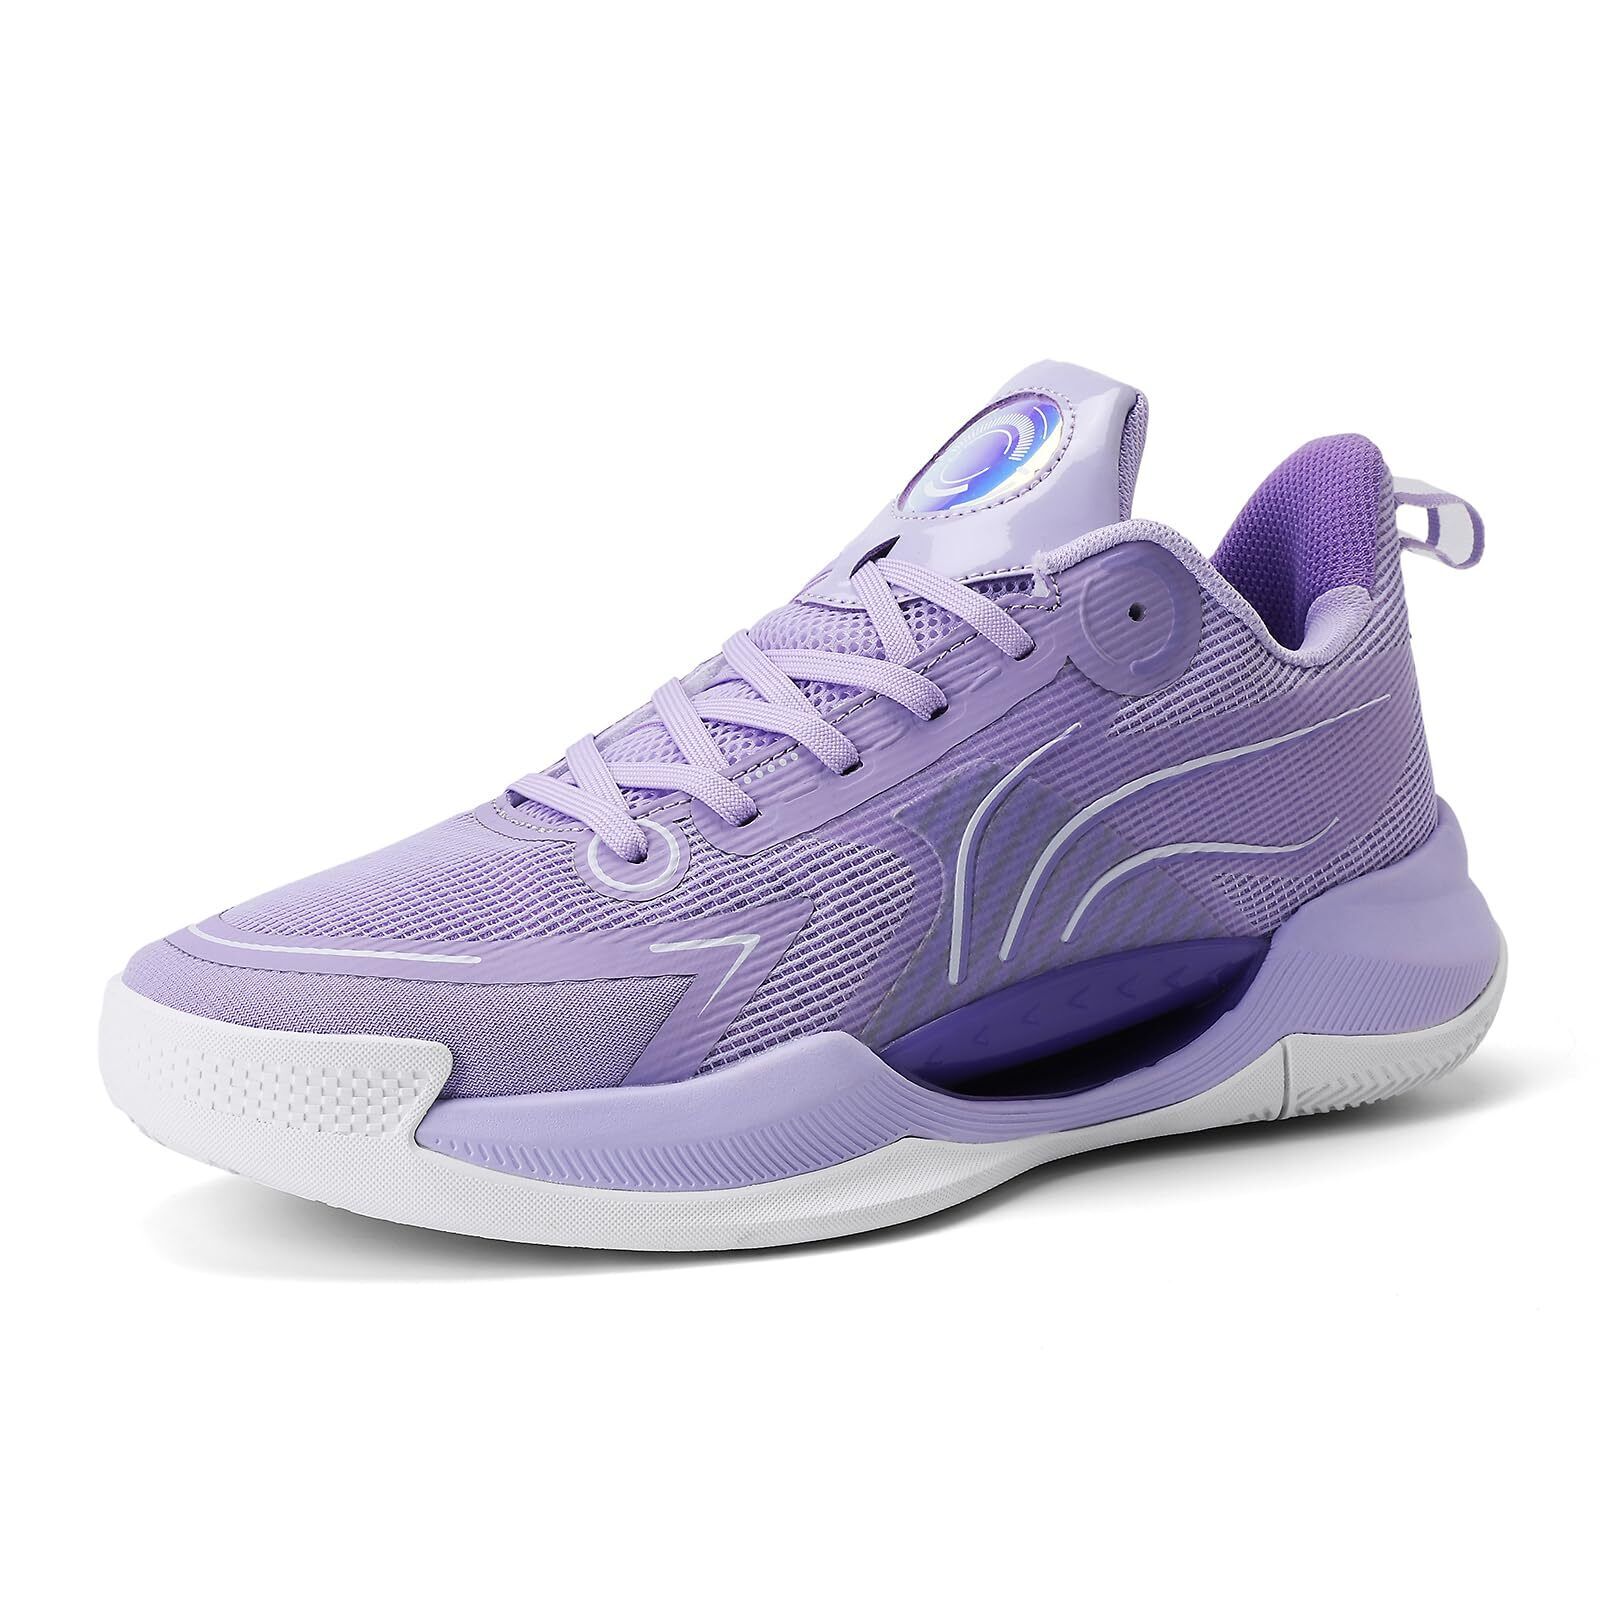 Glamorous Women Basketball Shoes Fashion Athletic Sneakers Unisex Outdoor Sport Shoes L… on eBay